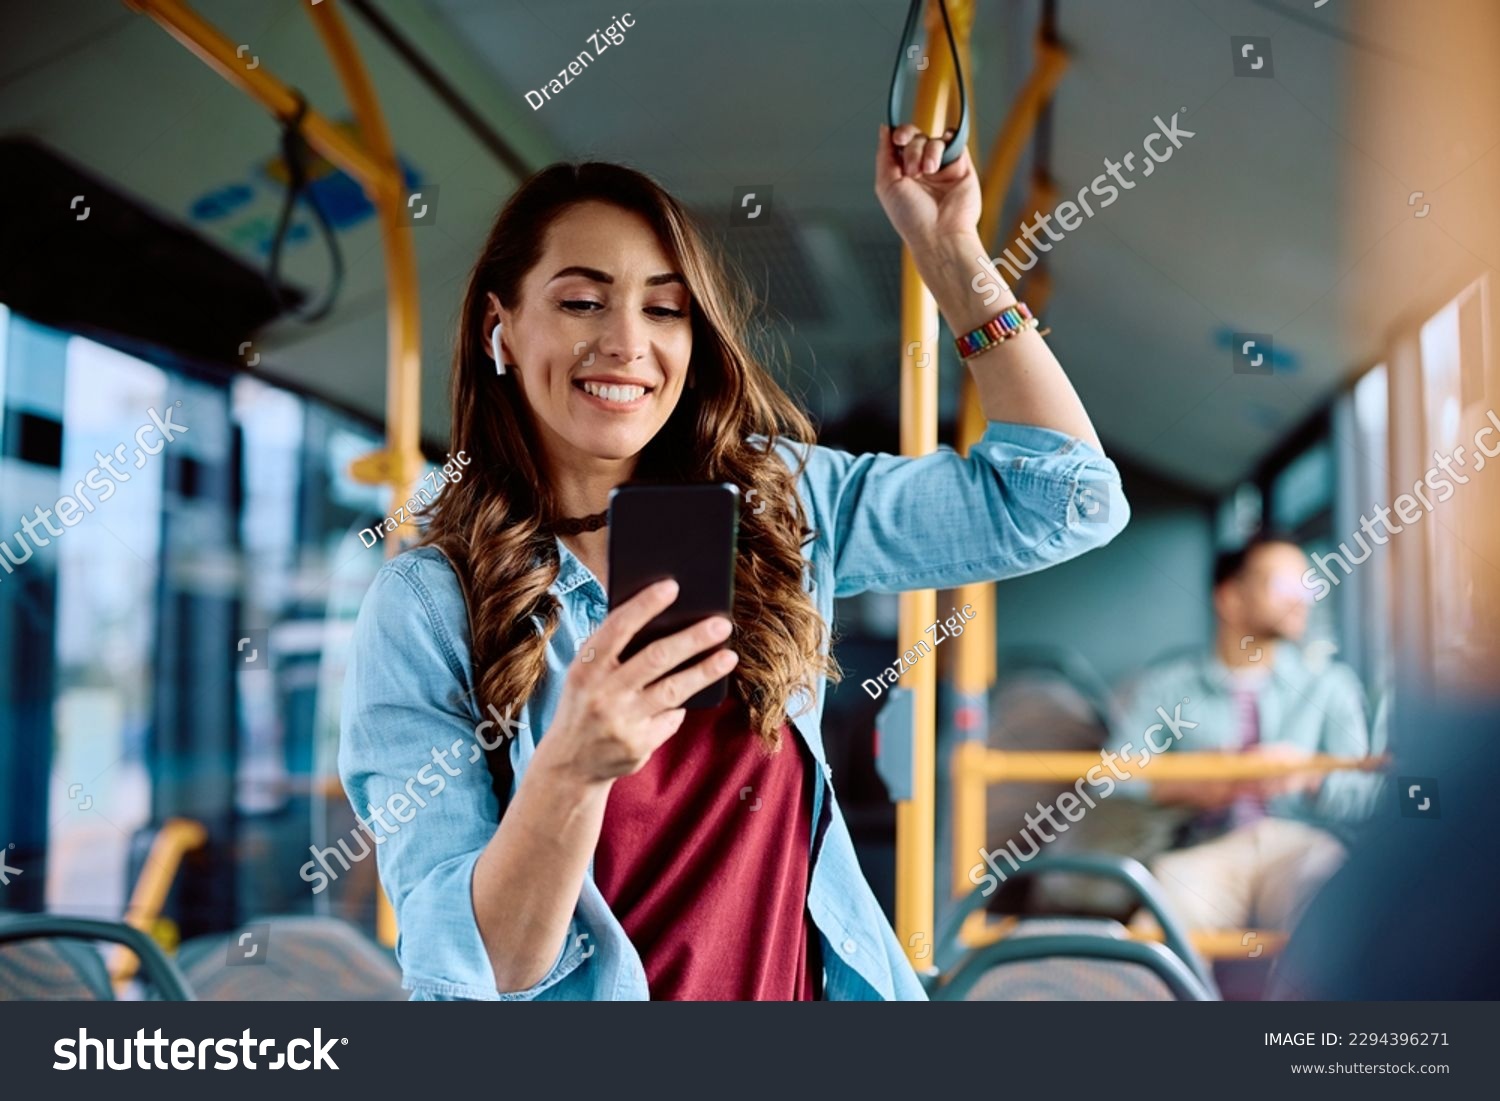 Happy woman text messaging on mobile phone while riding in a bus.  #2294396271